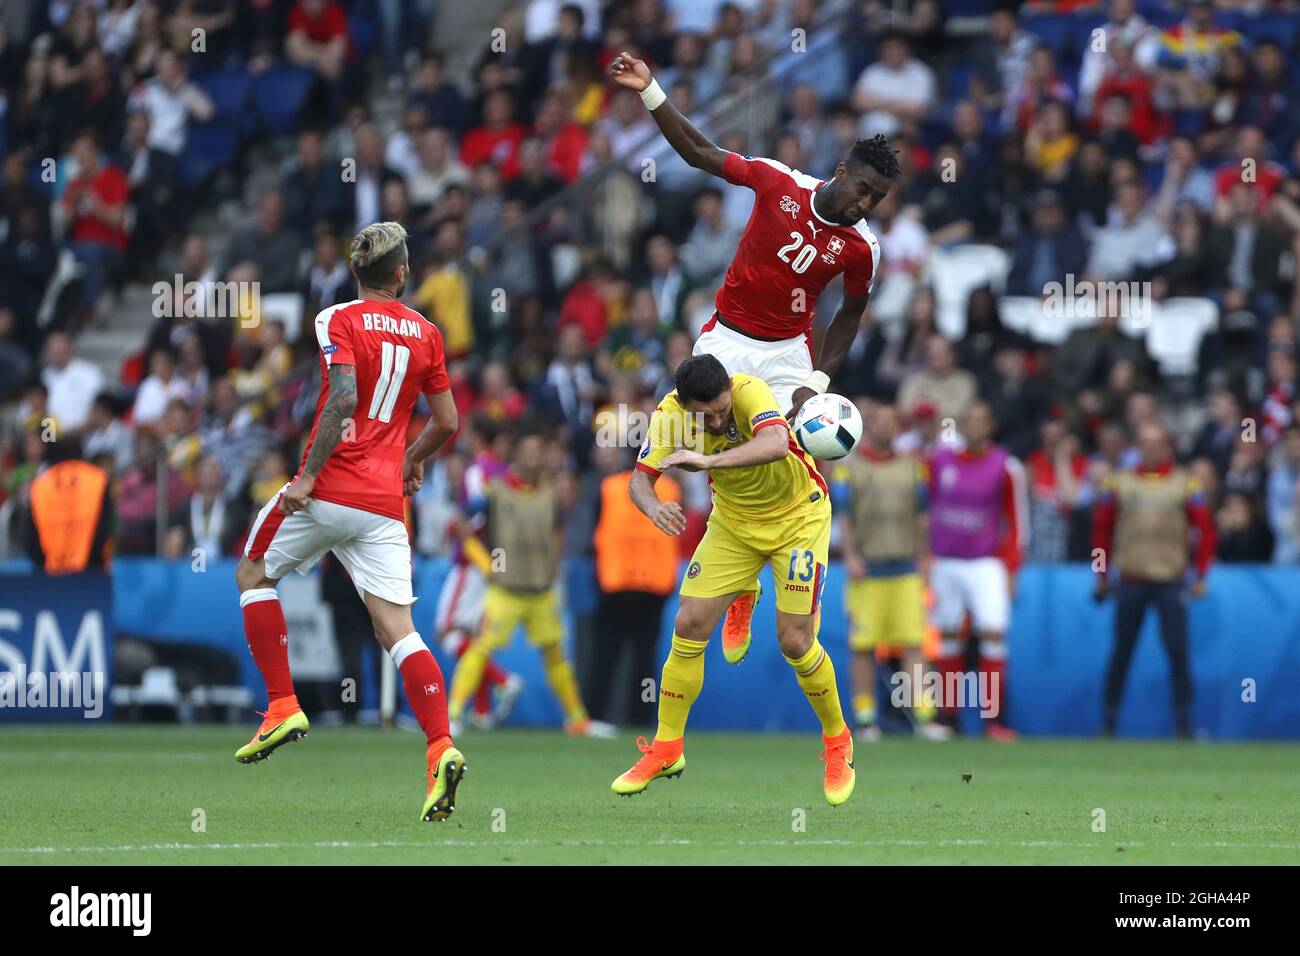 Johan Djourou of Switzerland and Claudiu Keseru of Romania contest a header during the UEFA European Championship 2016 match at the Parc des Princes, Paris. Picture date June 15th, 2016 Pic Phil Oldham/Sportimage via PA Images Stock Photo